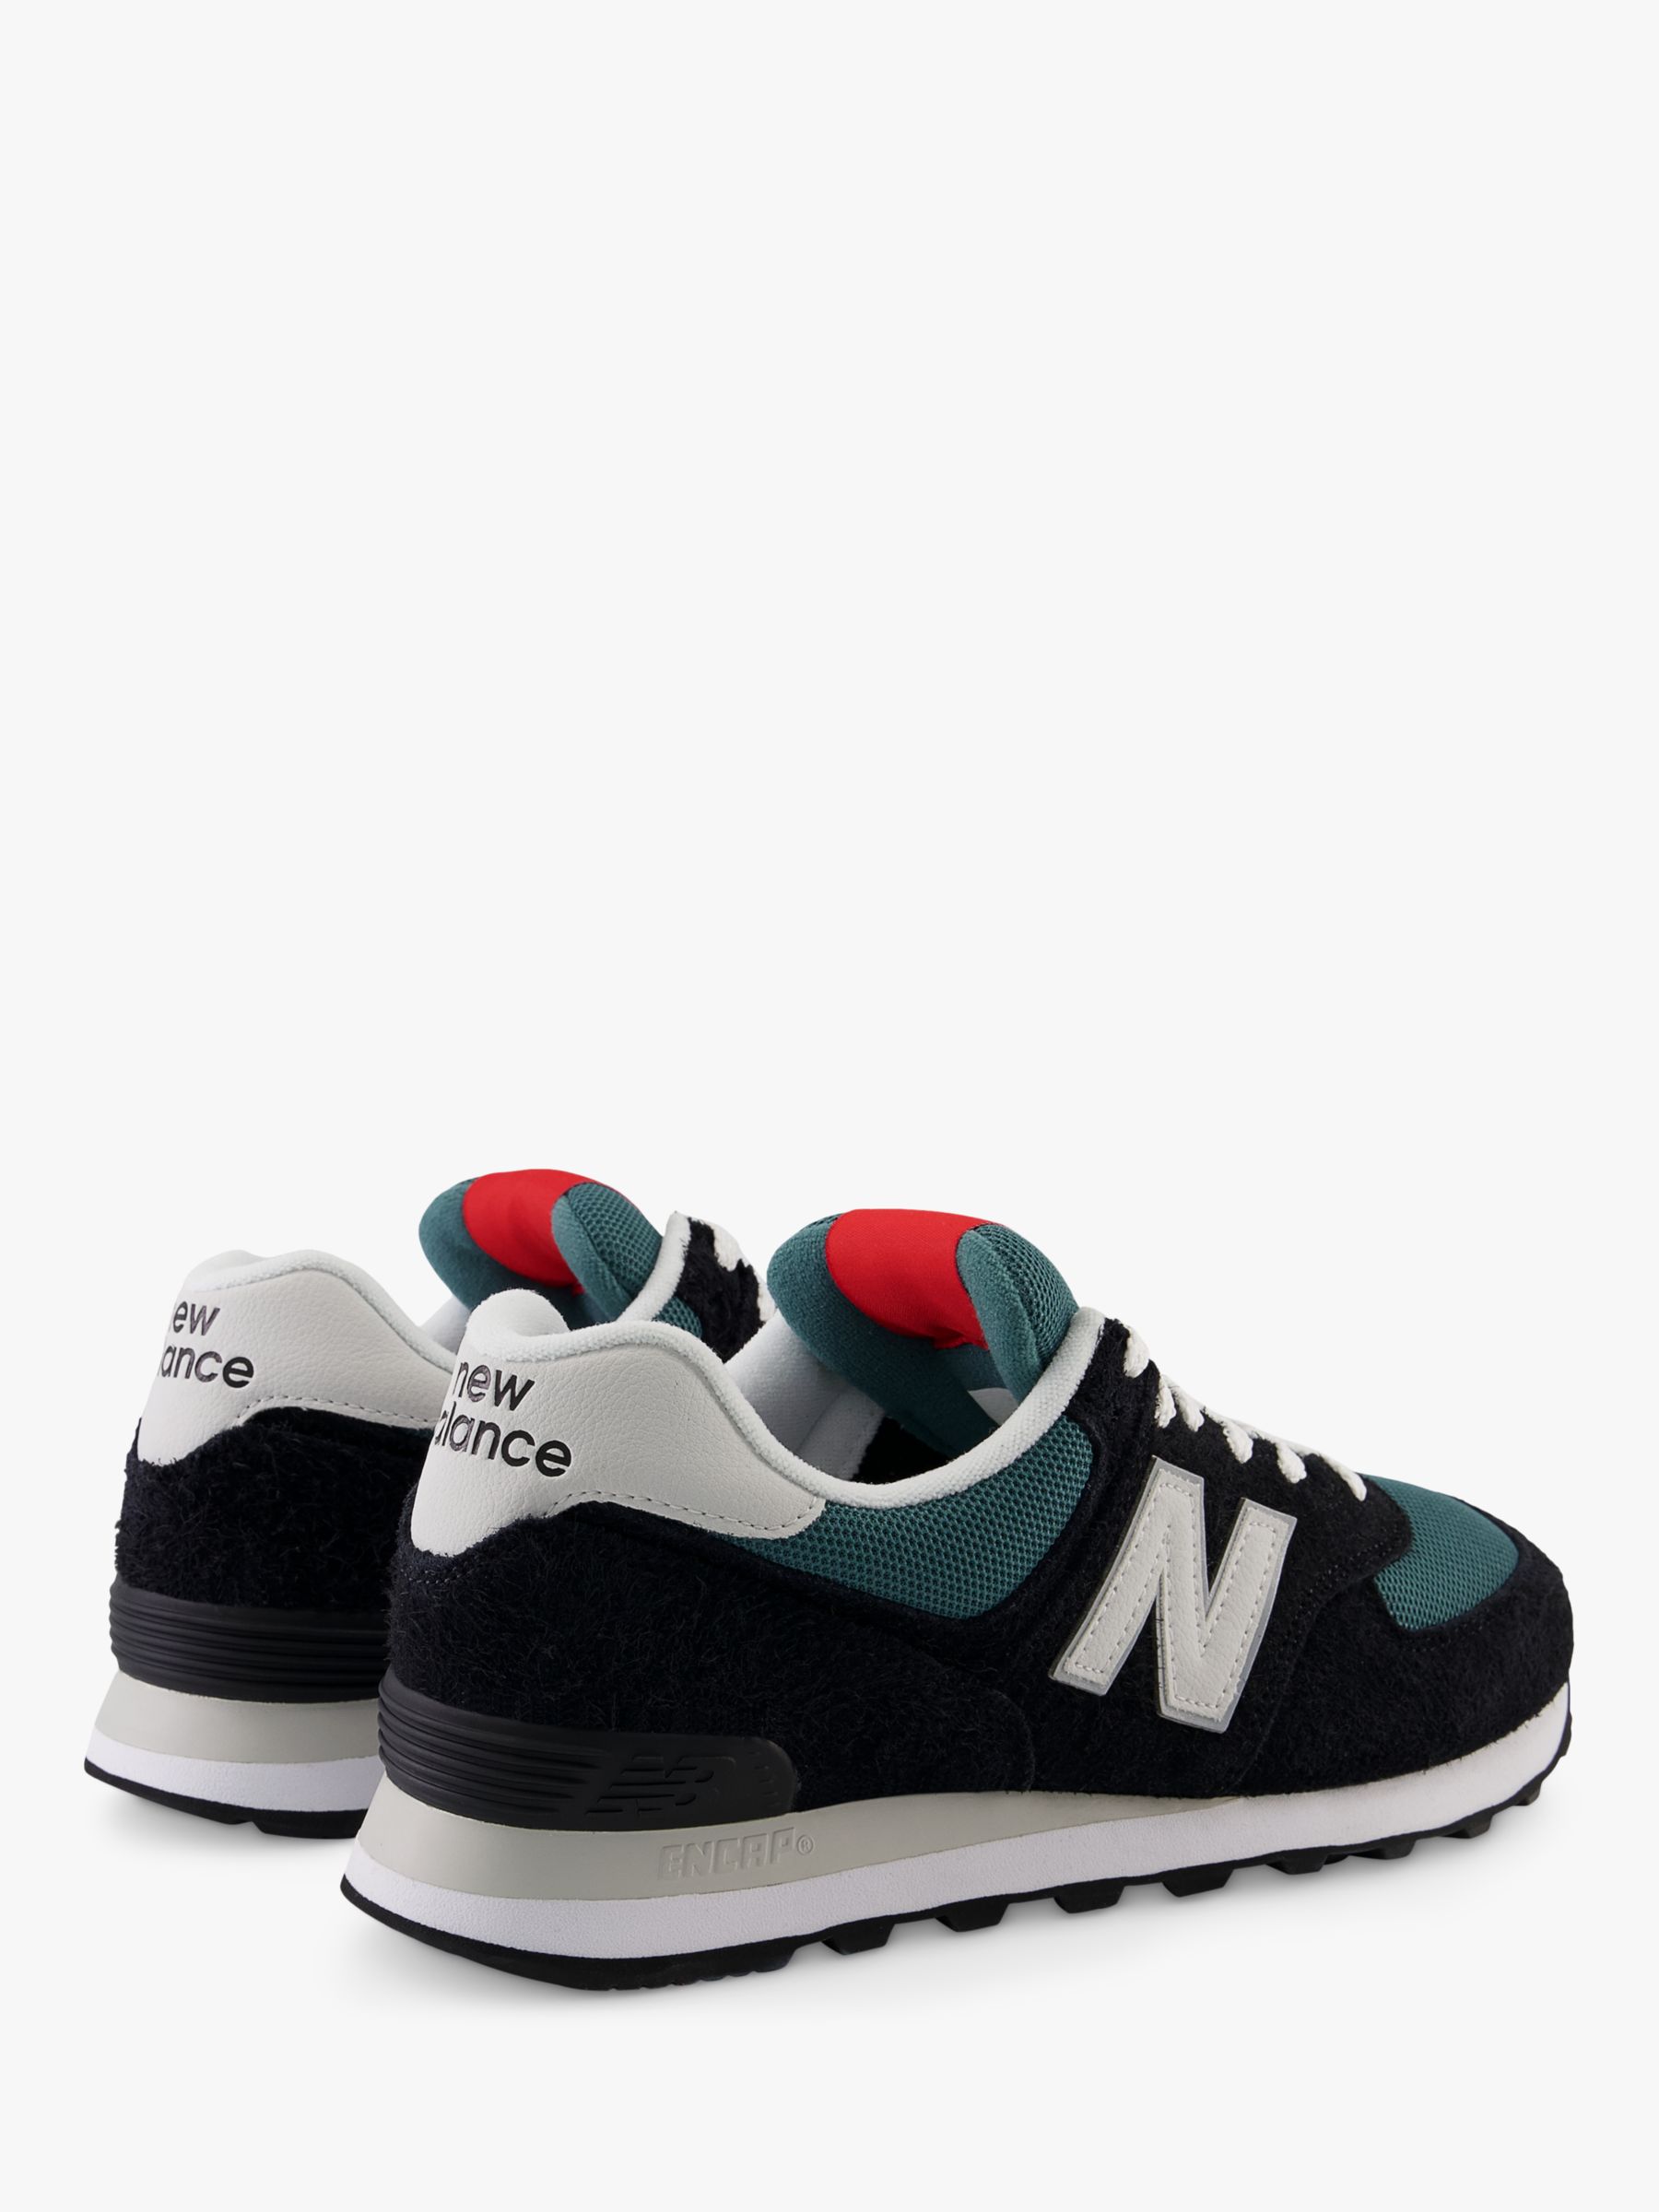 New Balance 574 Suede Trainers, Black/Blue, 7